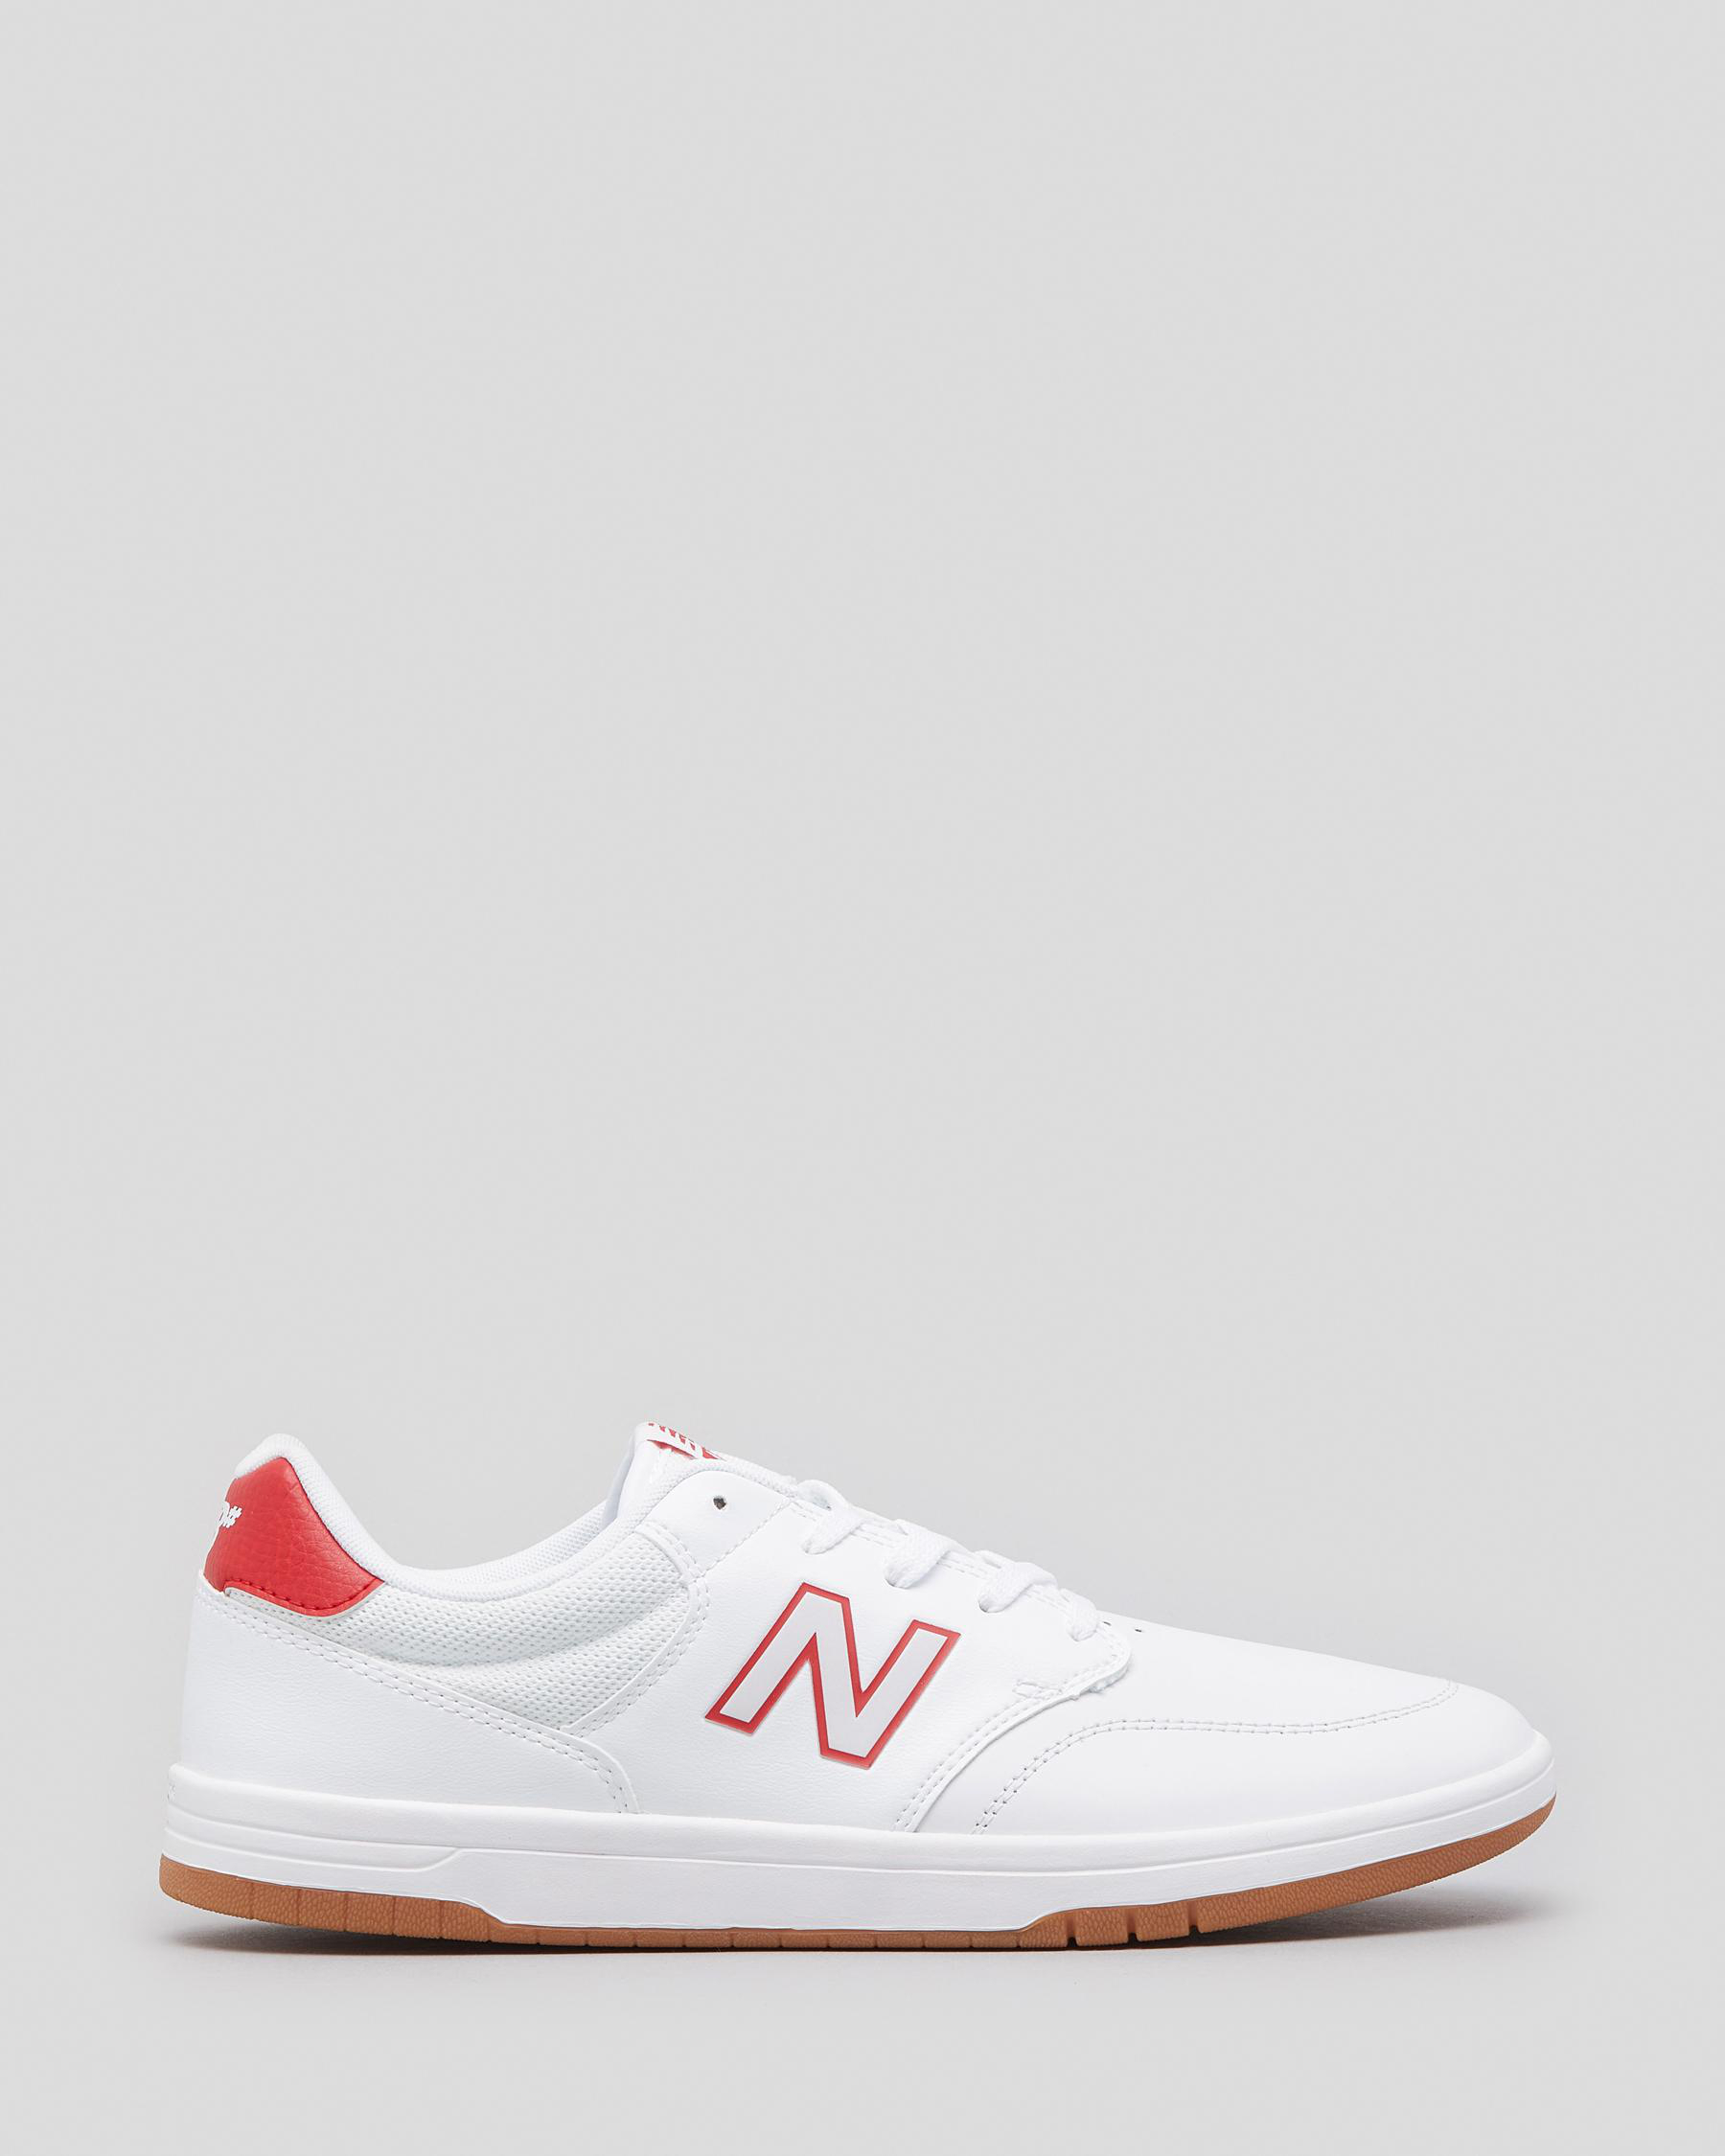 Shop New Balance NB 425 Shoes In White/red - Fast Shipping & Easy ...